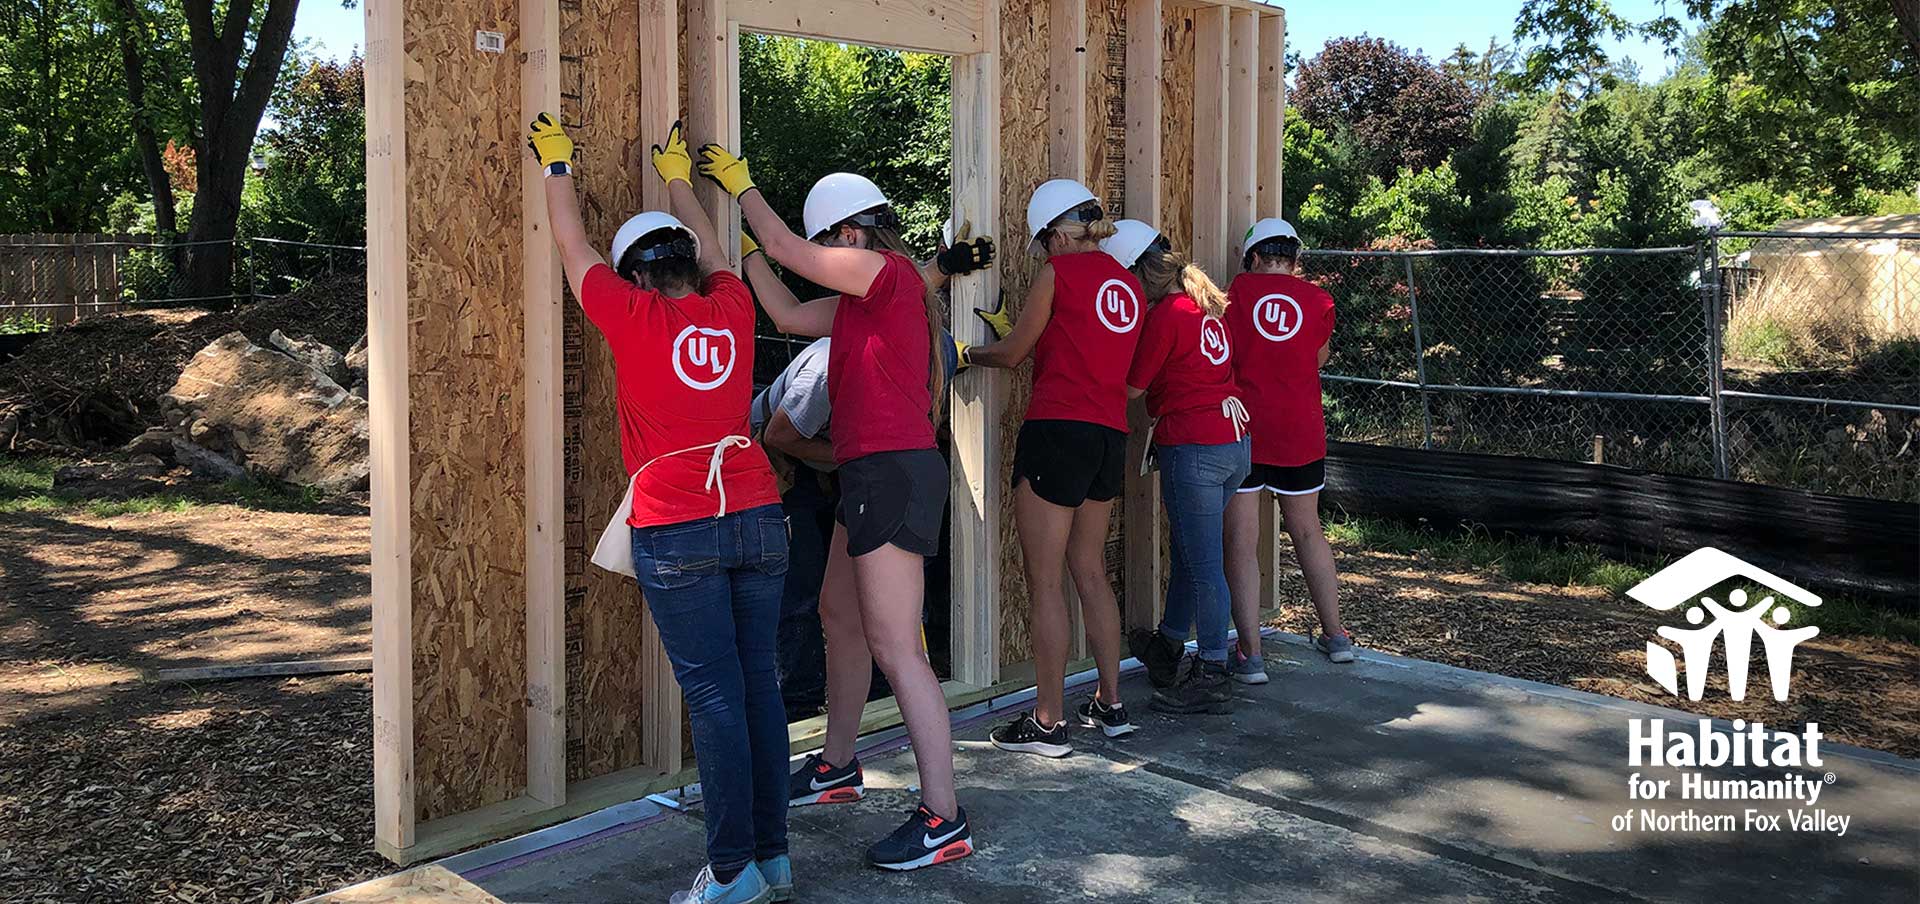 UL employees putting up external wall for Habitat for Humanity